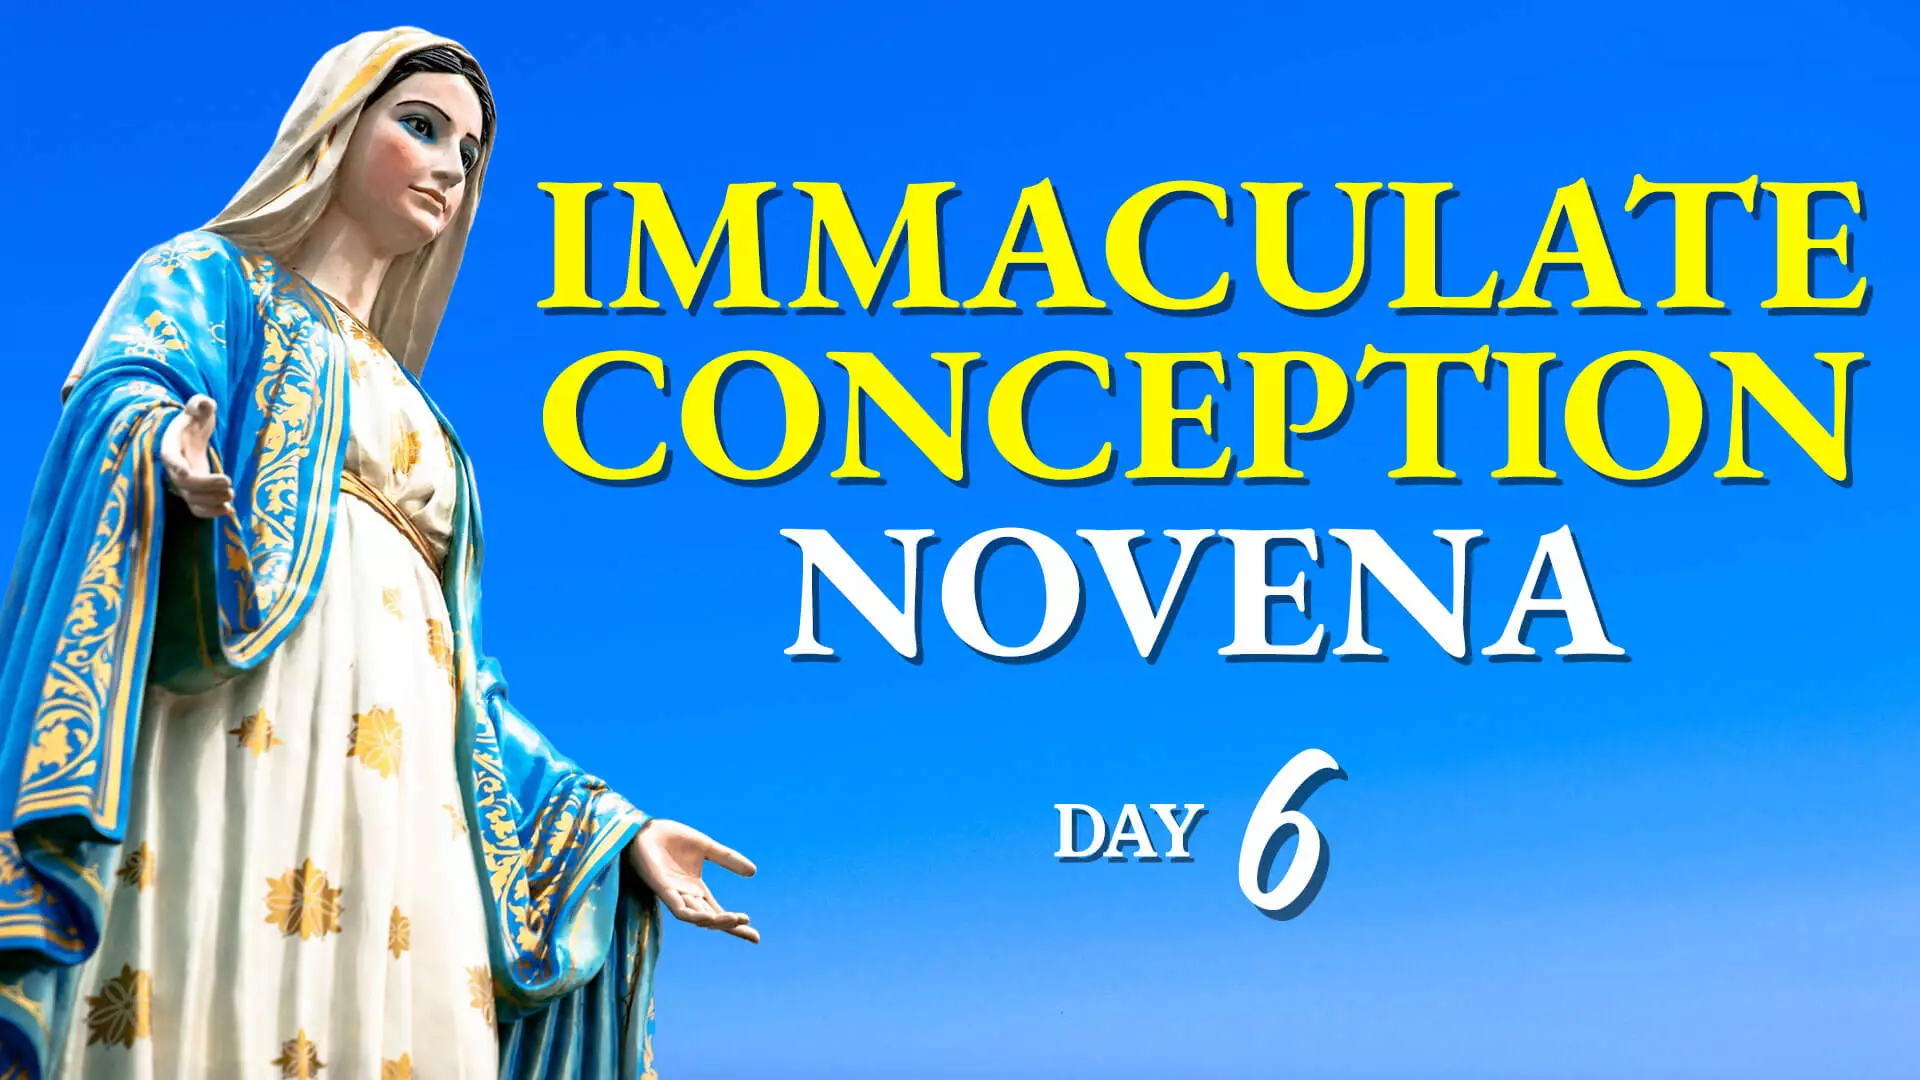 Immaculate Conception Novena Day 6